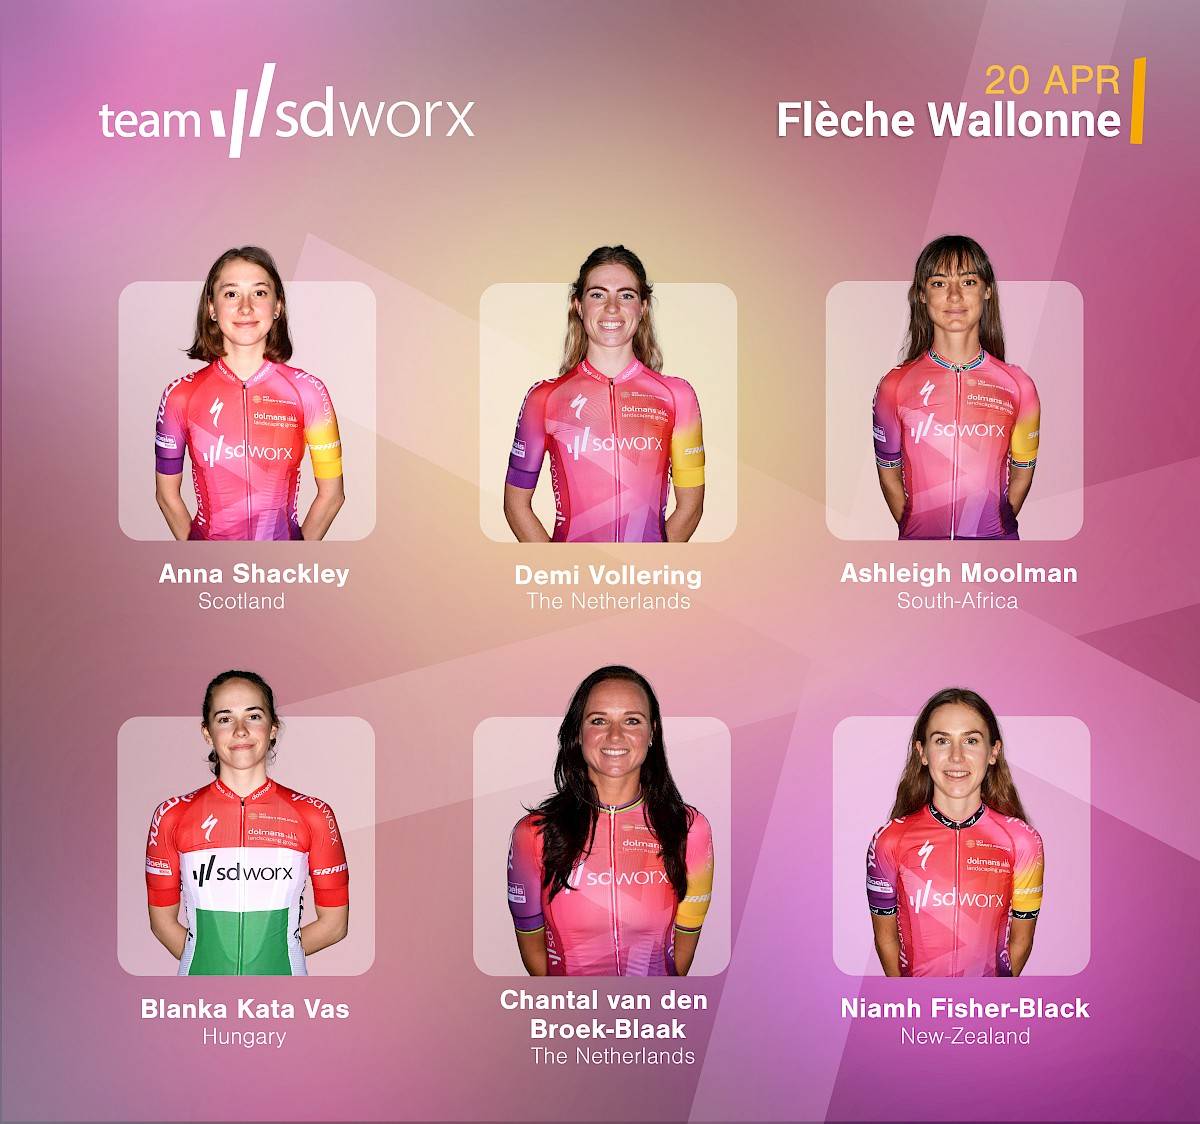 Team SD Worx wants to keep Flèche Wallone in the team